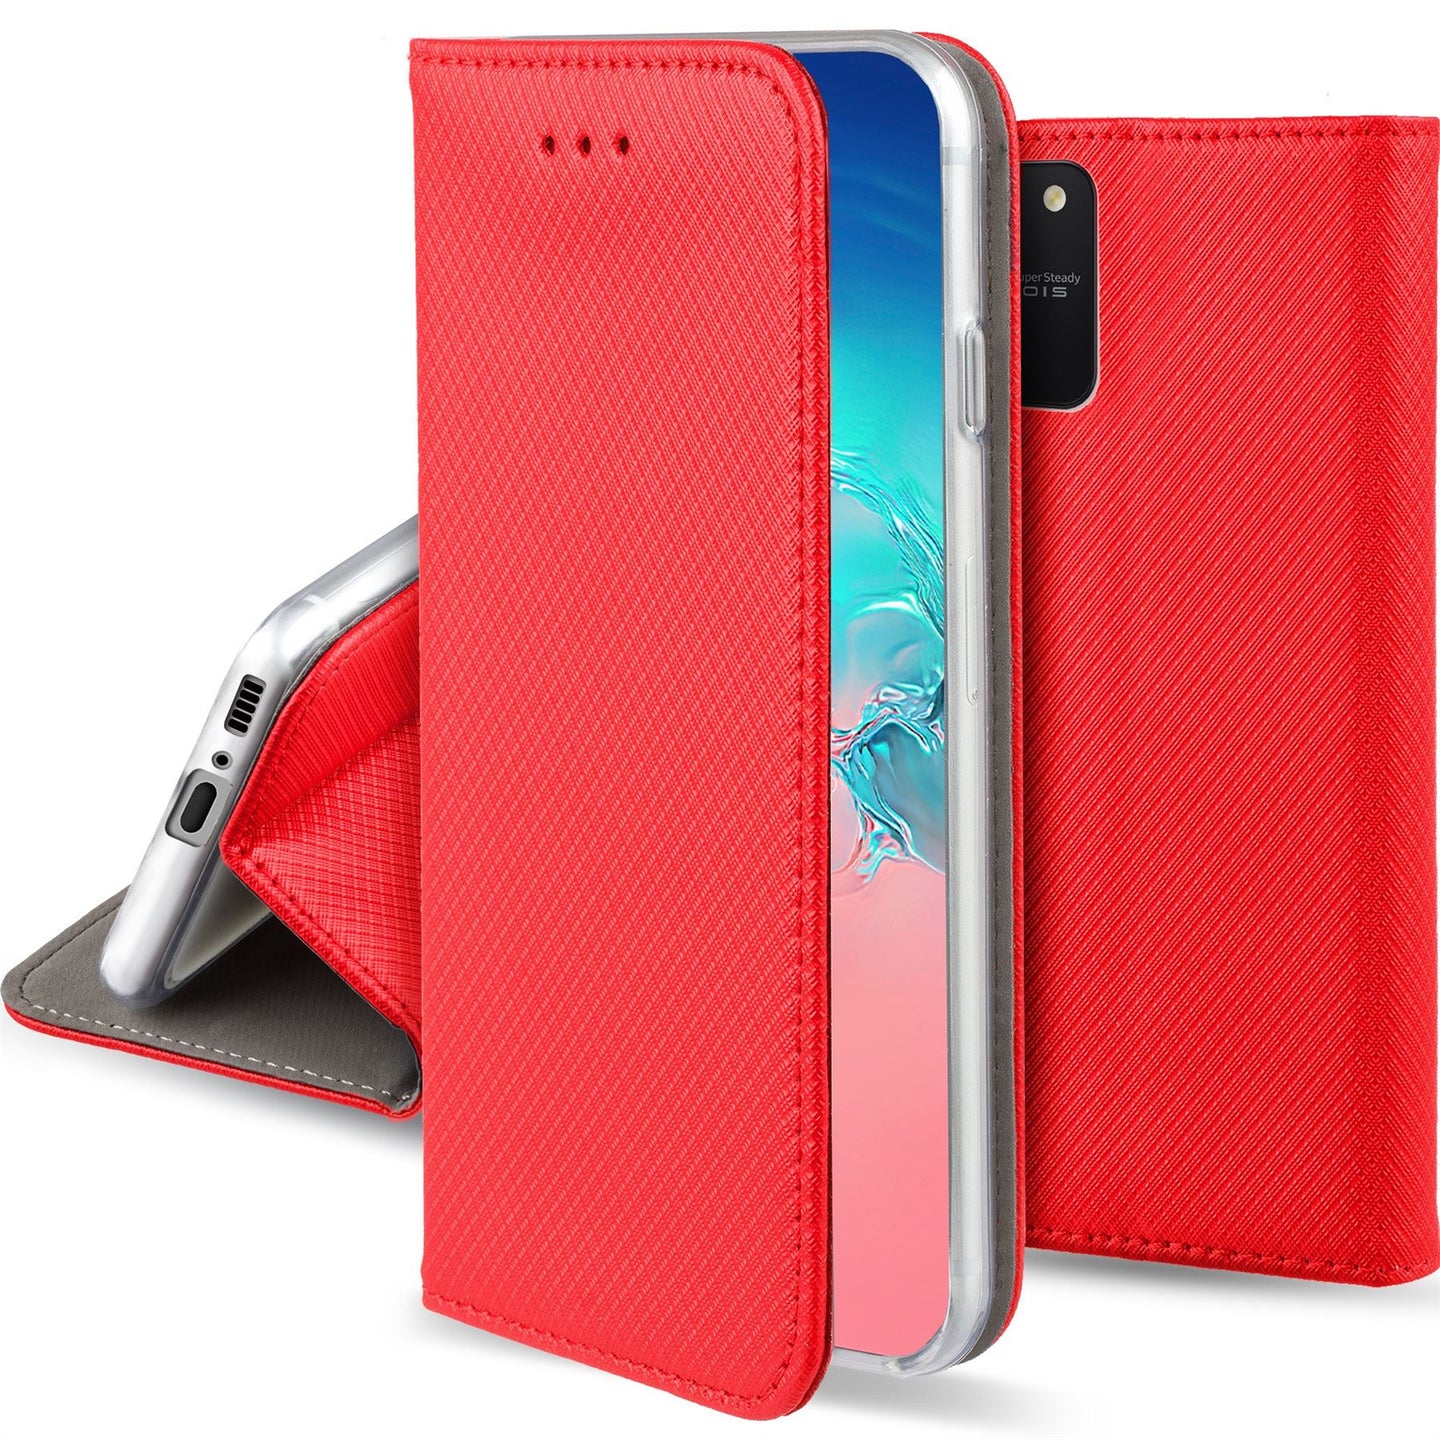 Moozy Case Flip Cover for Samsung S10 Lite, Red - Smart Magnetic Flip Case with Card Holder and Stand